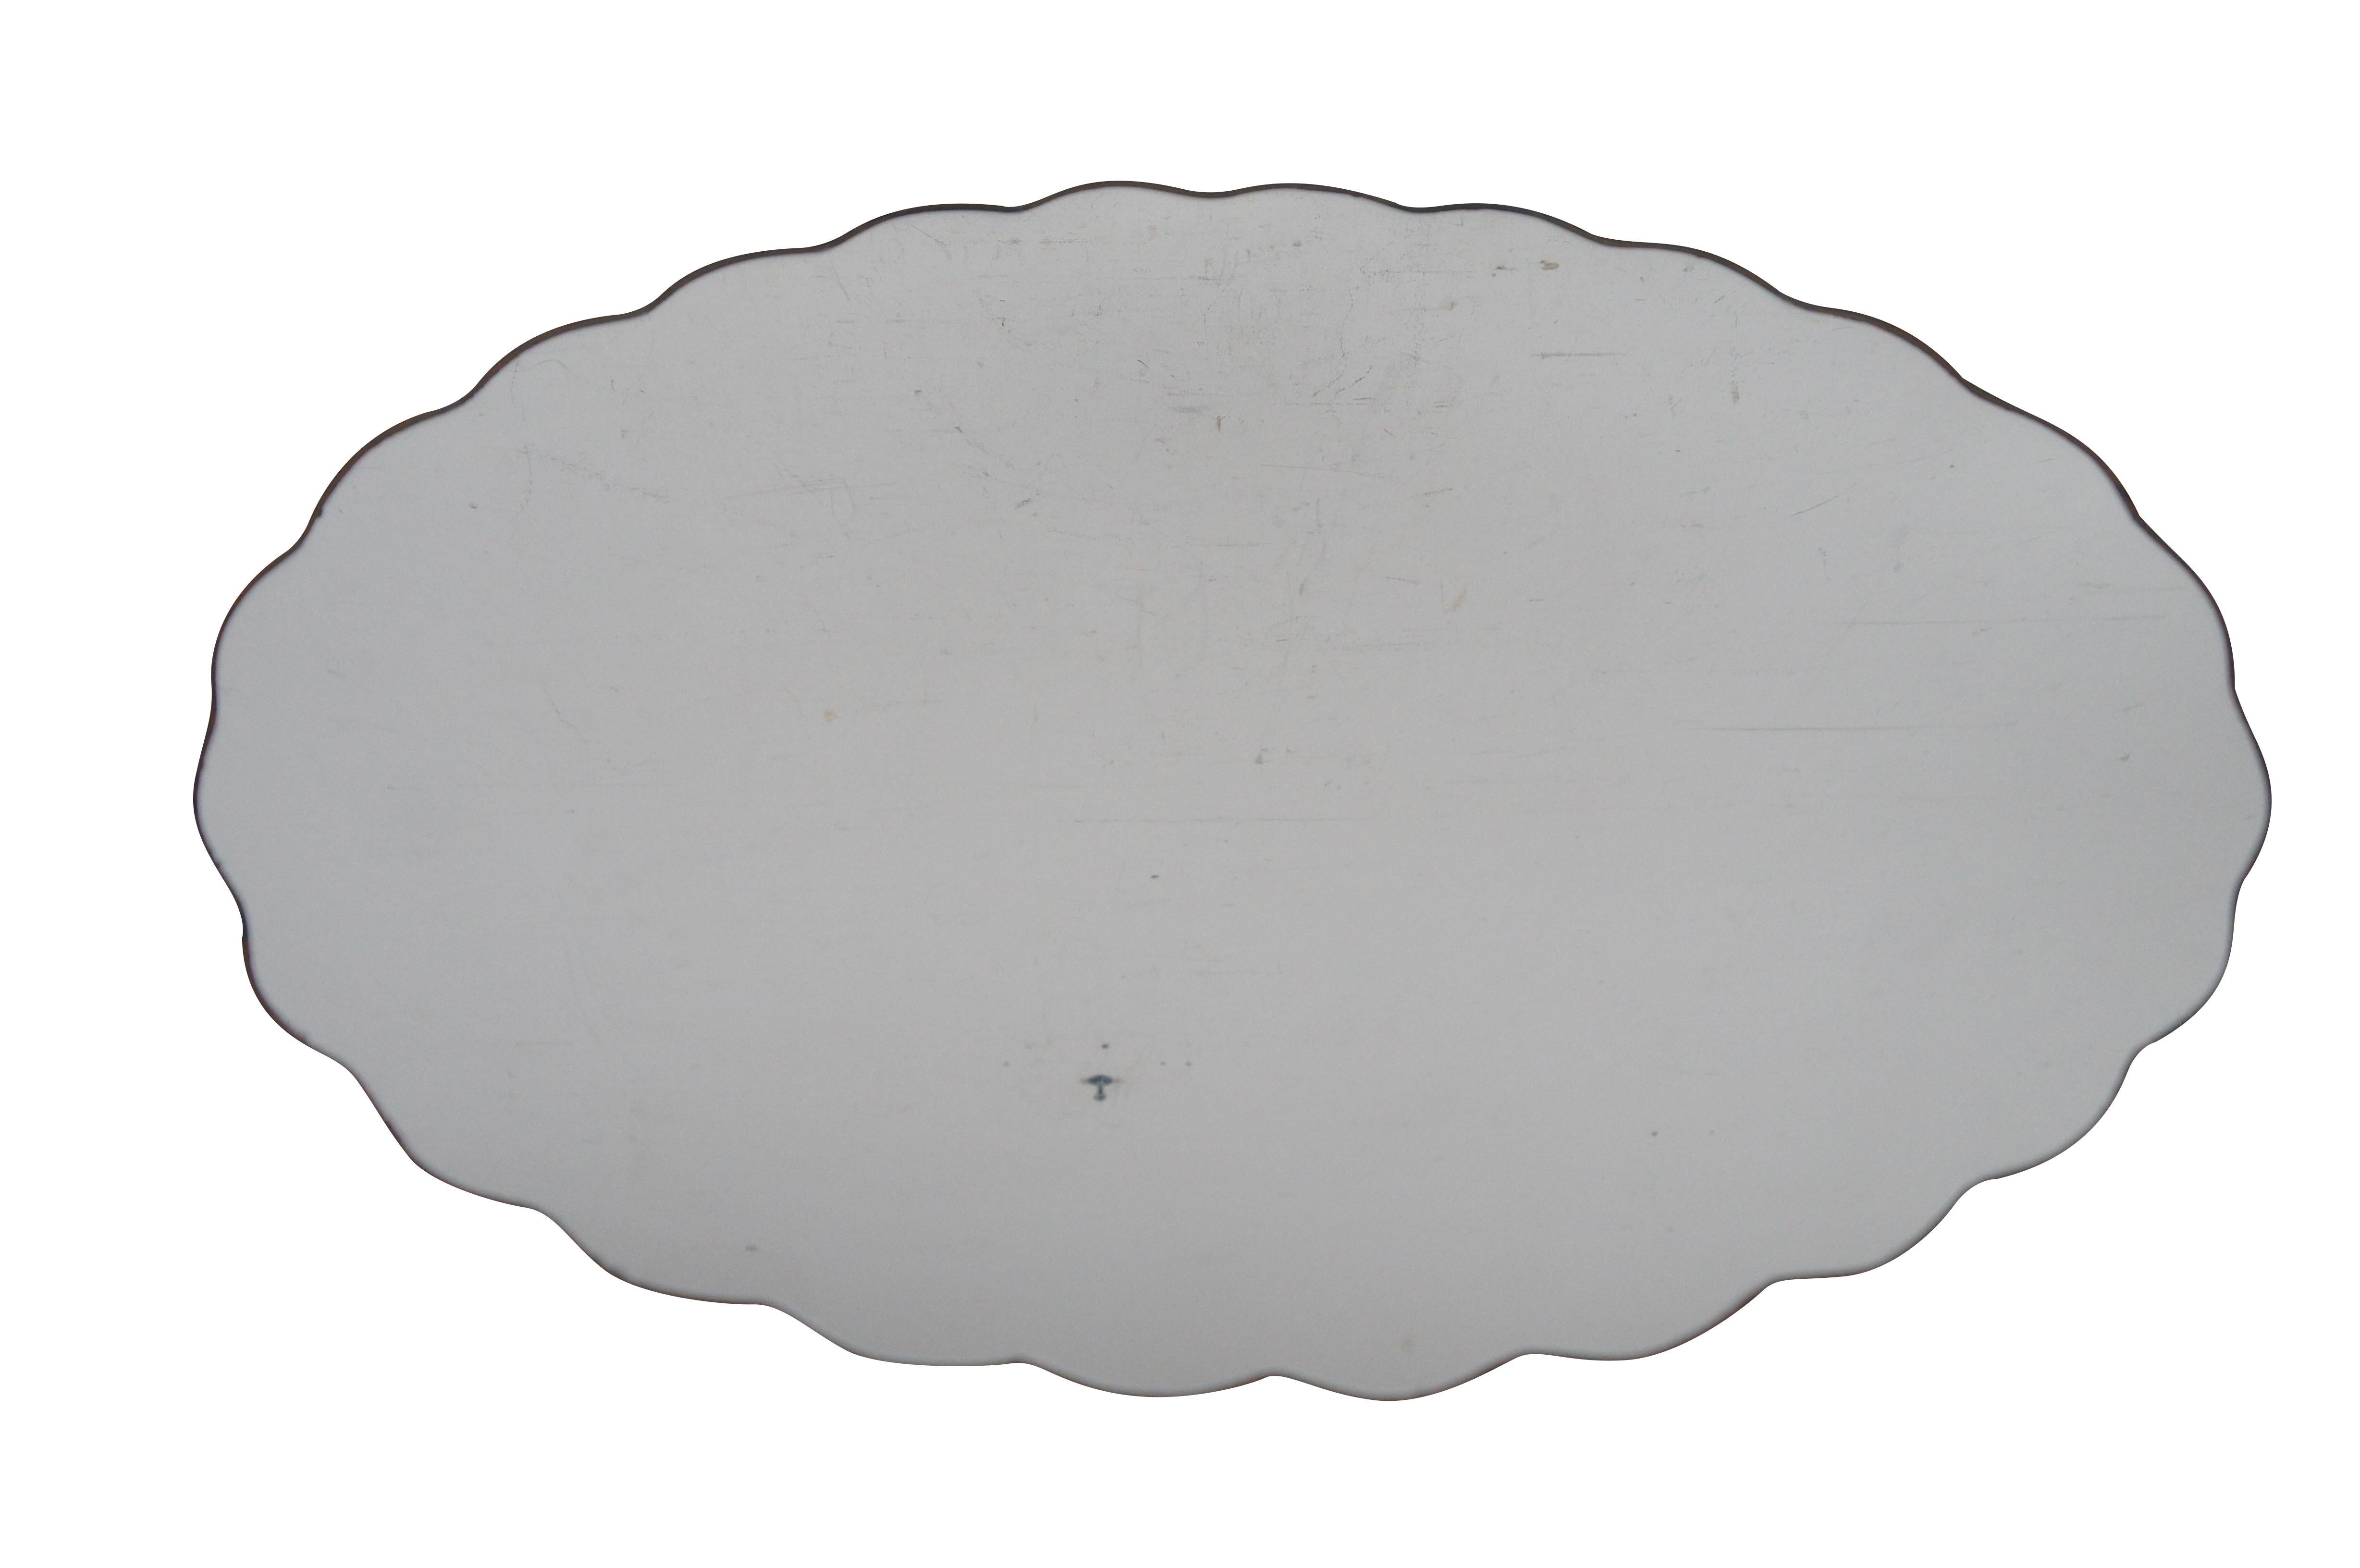 Vintage custom made Falconer Durever mirrored place mats.  Made of glass featuring French style scalloped oval form.  This very hard cut to make was ordered by our client circa June 18, 1982.  

DUREVER FALCONER MIRRORS is a trademark of FALCONER